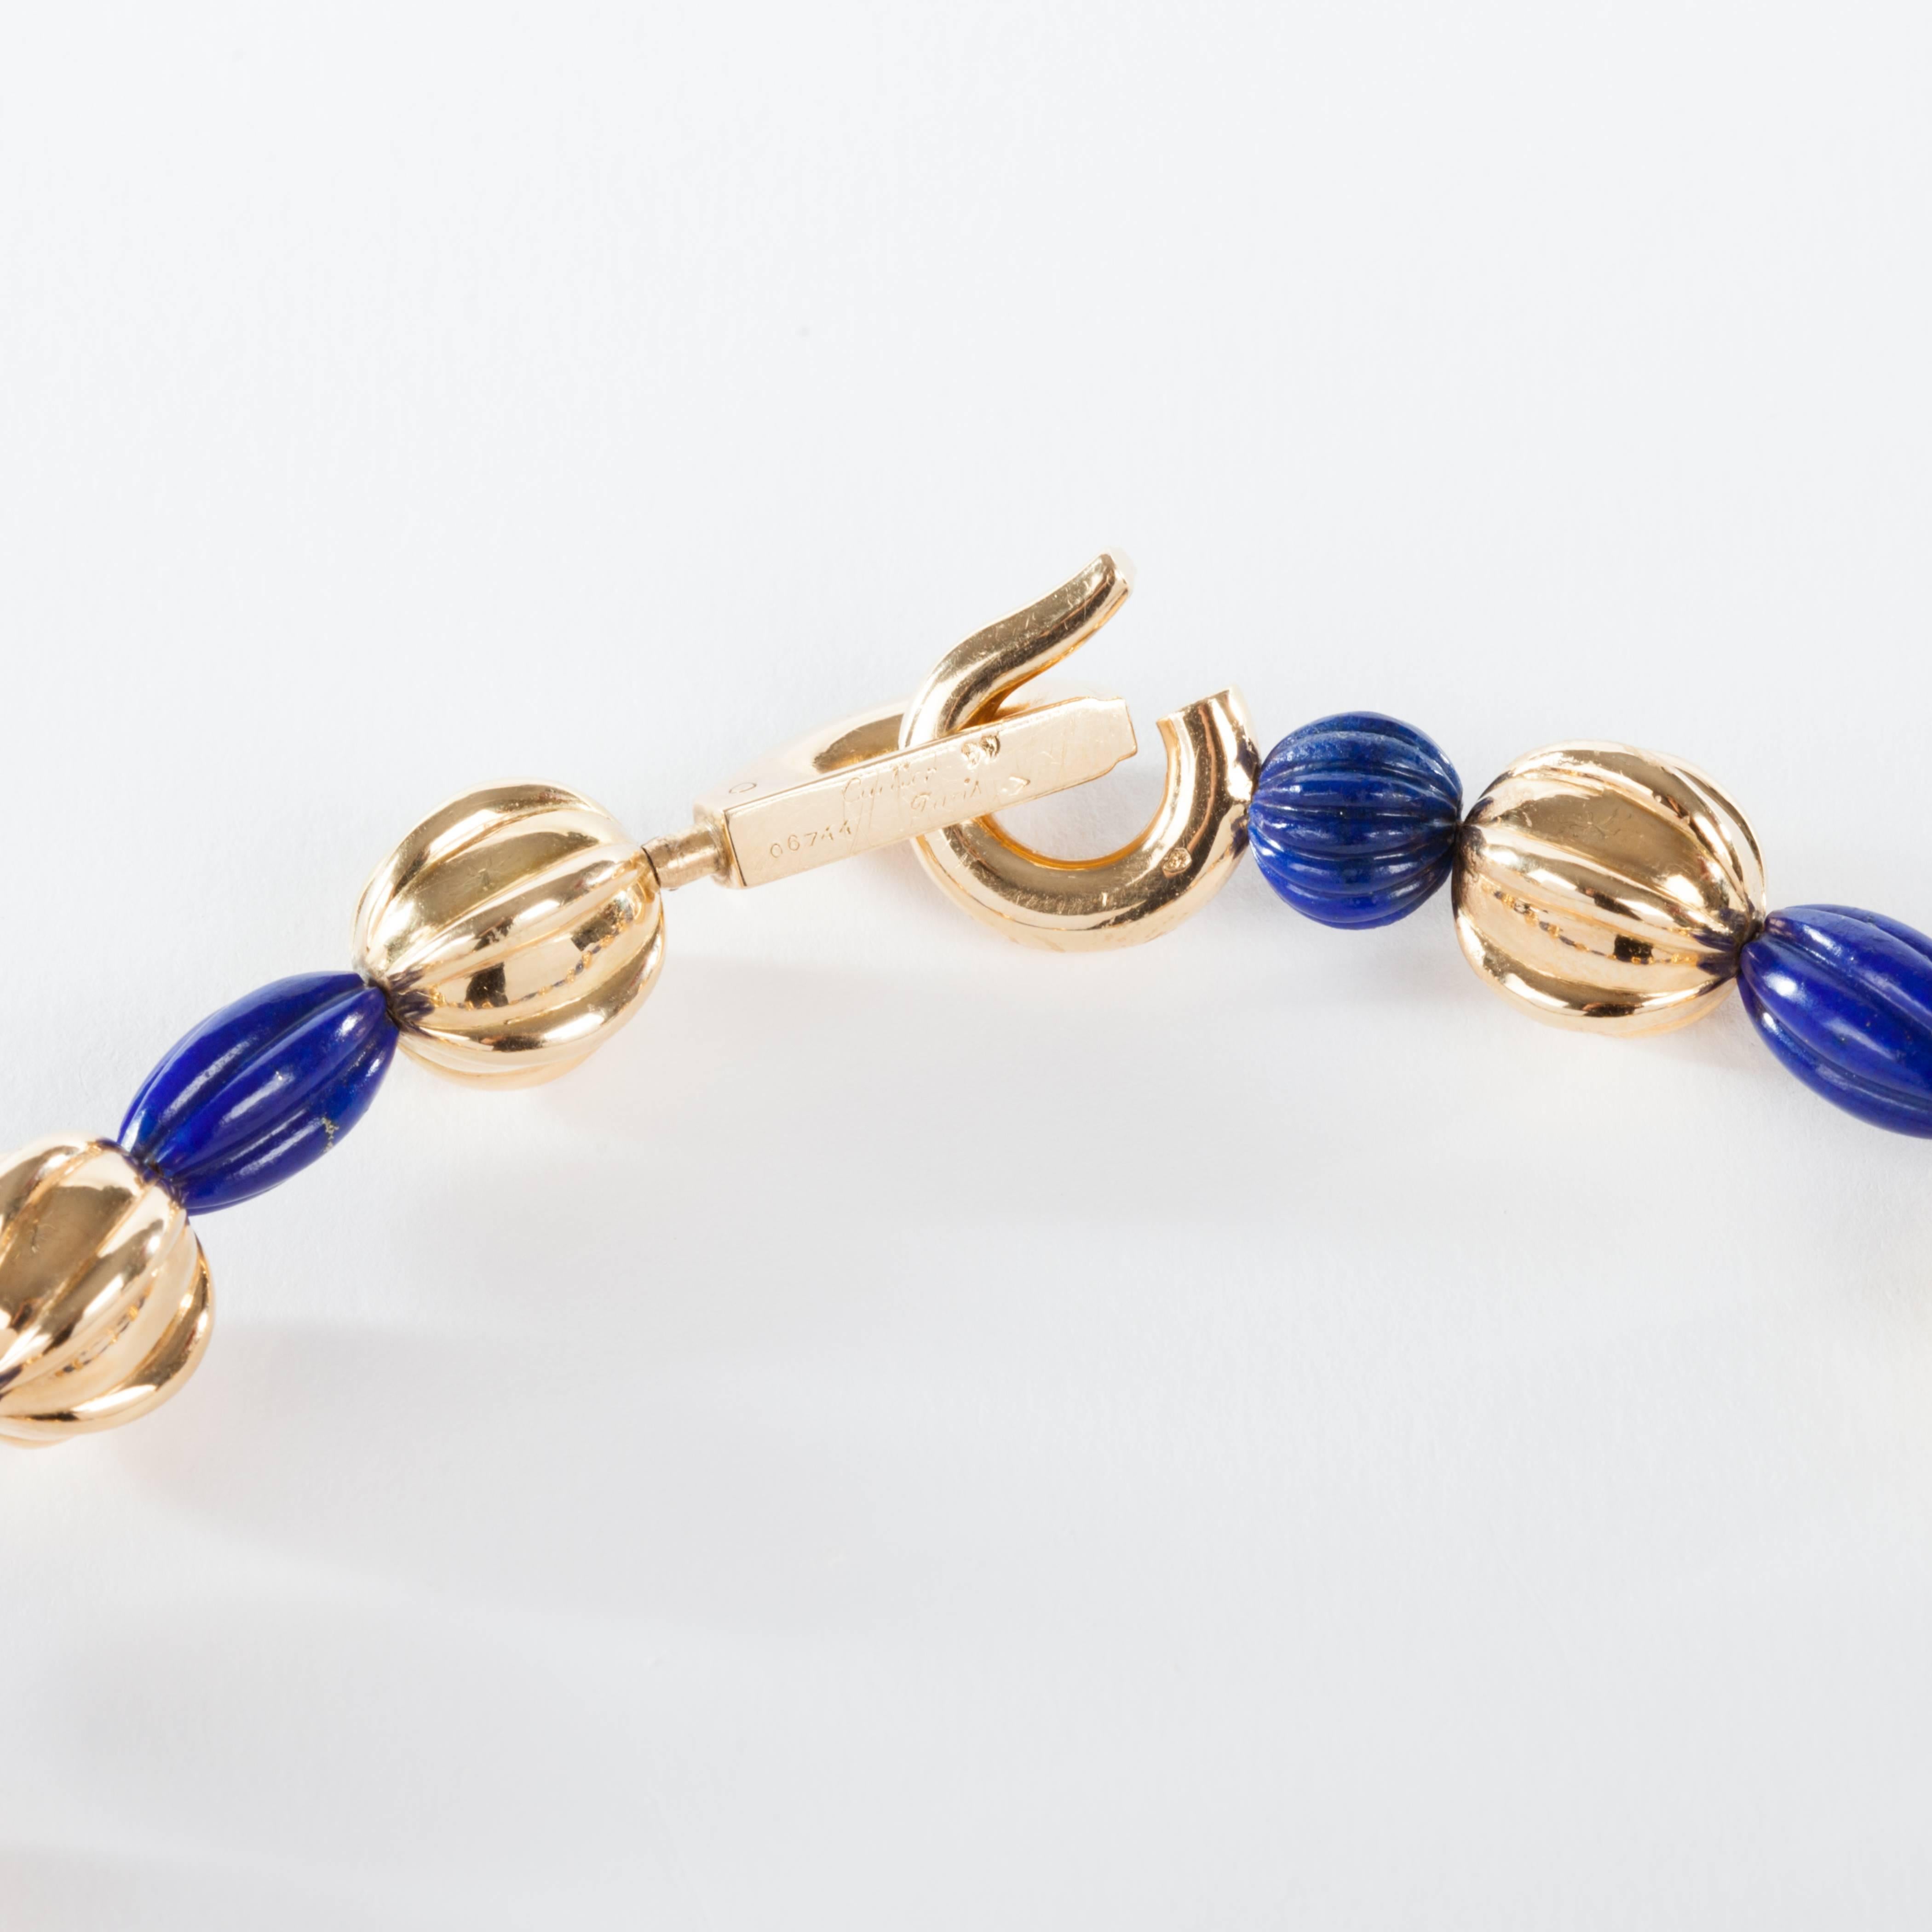 Cartier Lapis Lazuli Gold Diamond Bead Necklace. From a unique collection of vintage beaded jewelry.

The necklace has 12 lapis lazuli beads, 12 gold beads approximately 12mm.
The hook closure is diamond set. Total weight approximately 1.60